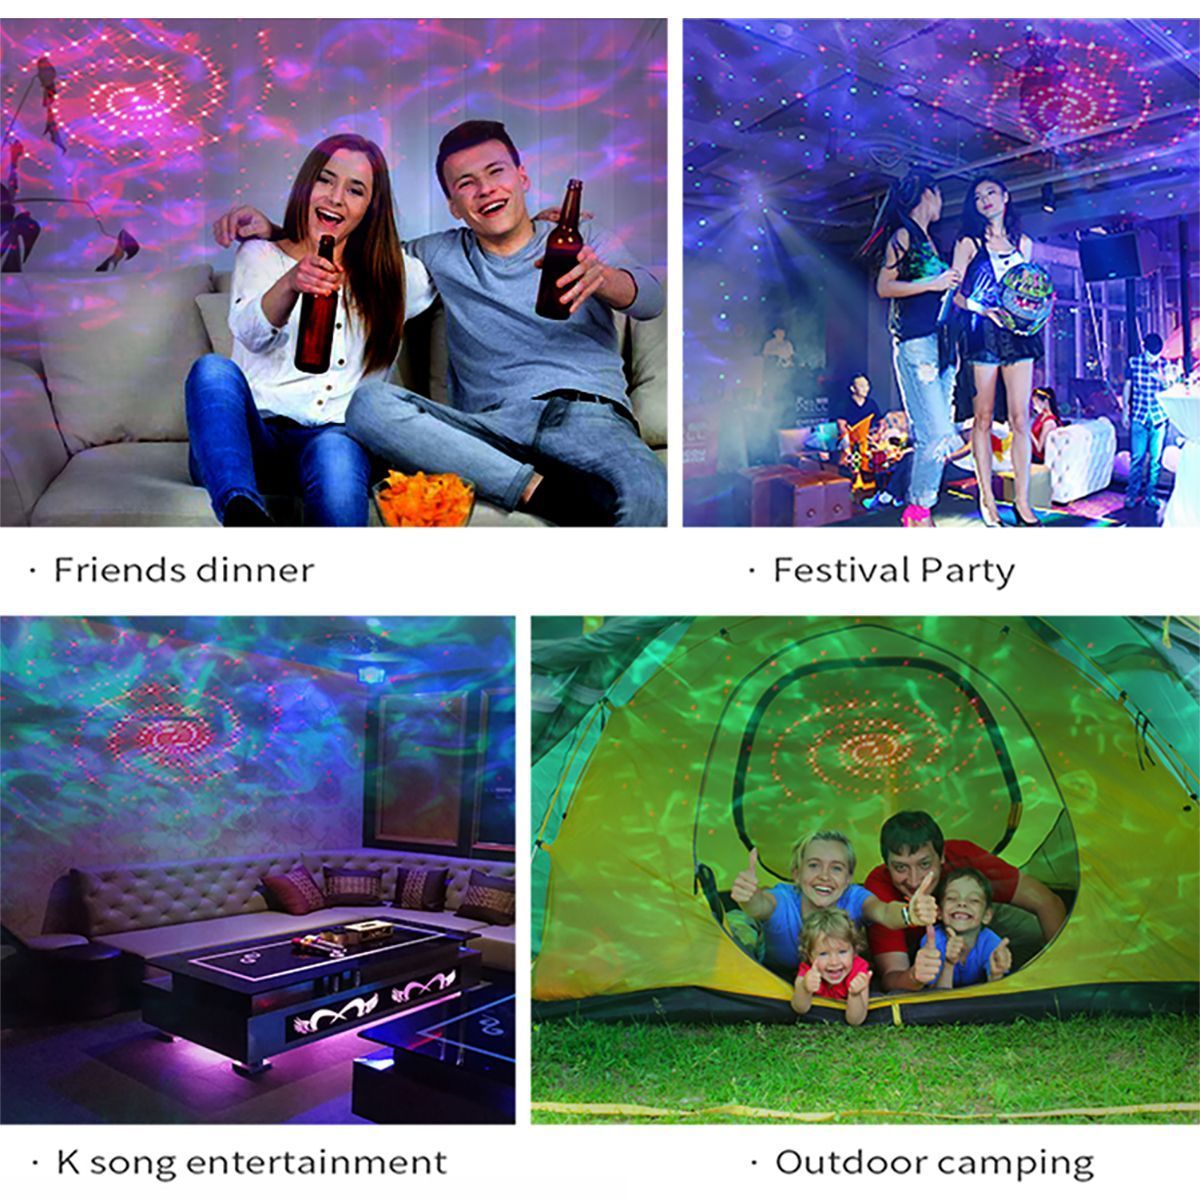 32-Modes-USB-LED-Laser-Light-Bluetooth-Music-Starry-Water-Wave-Projector-Lamp-1724108